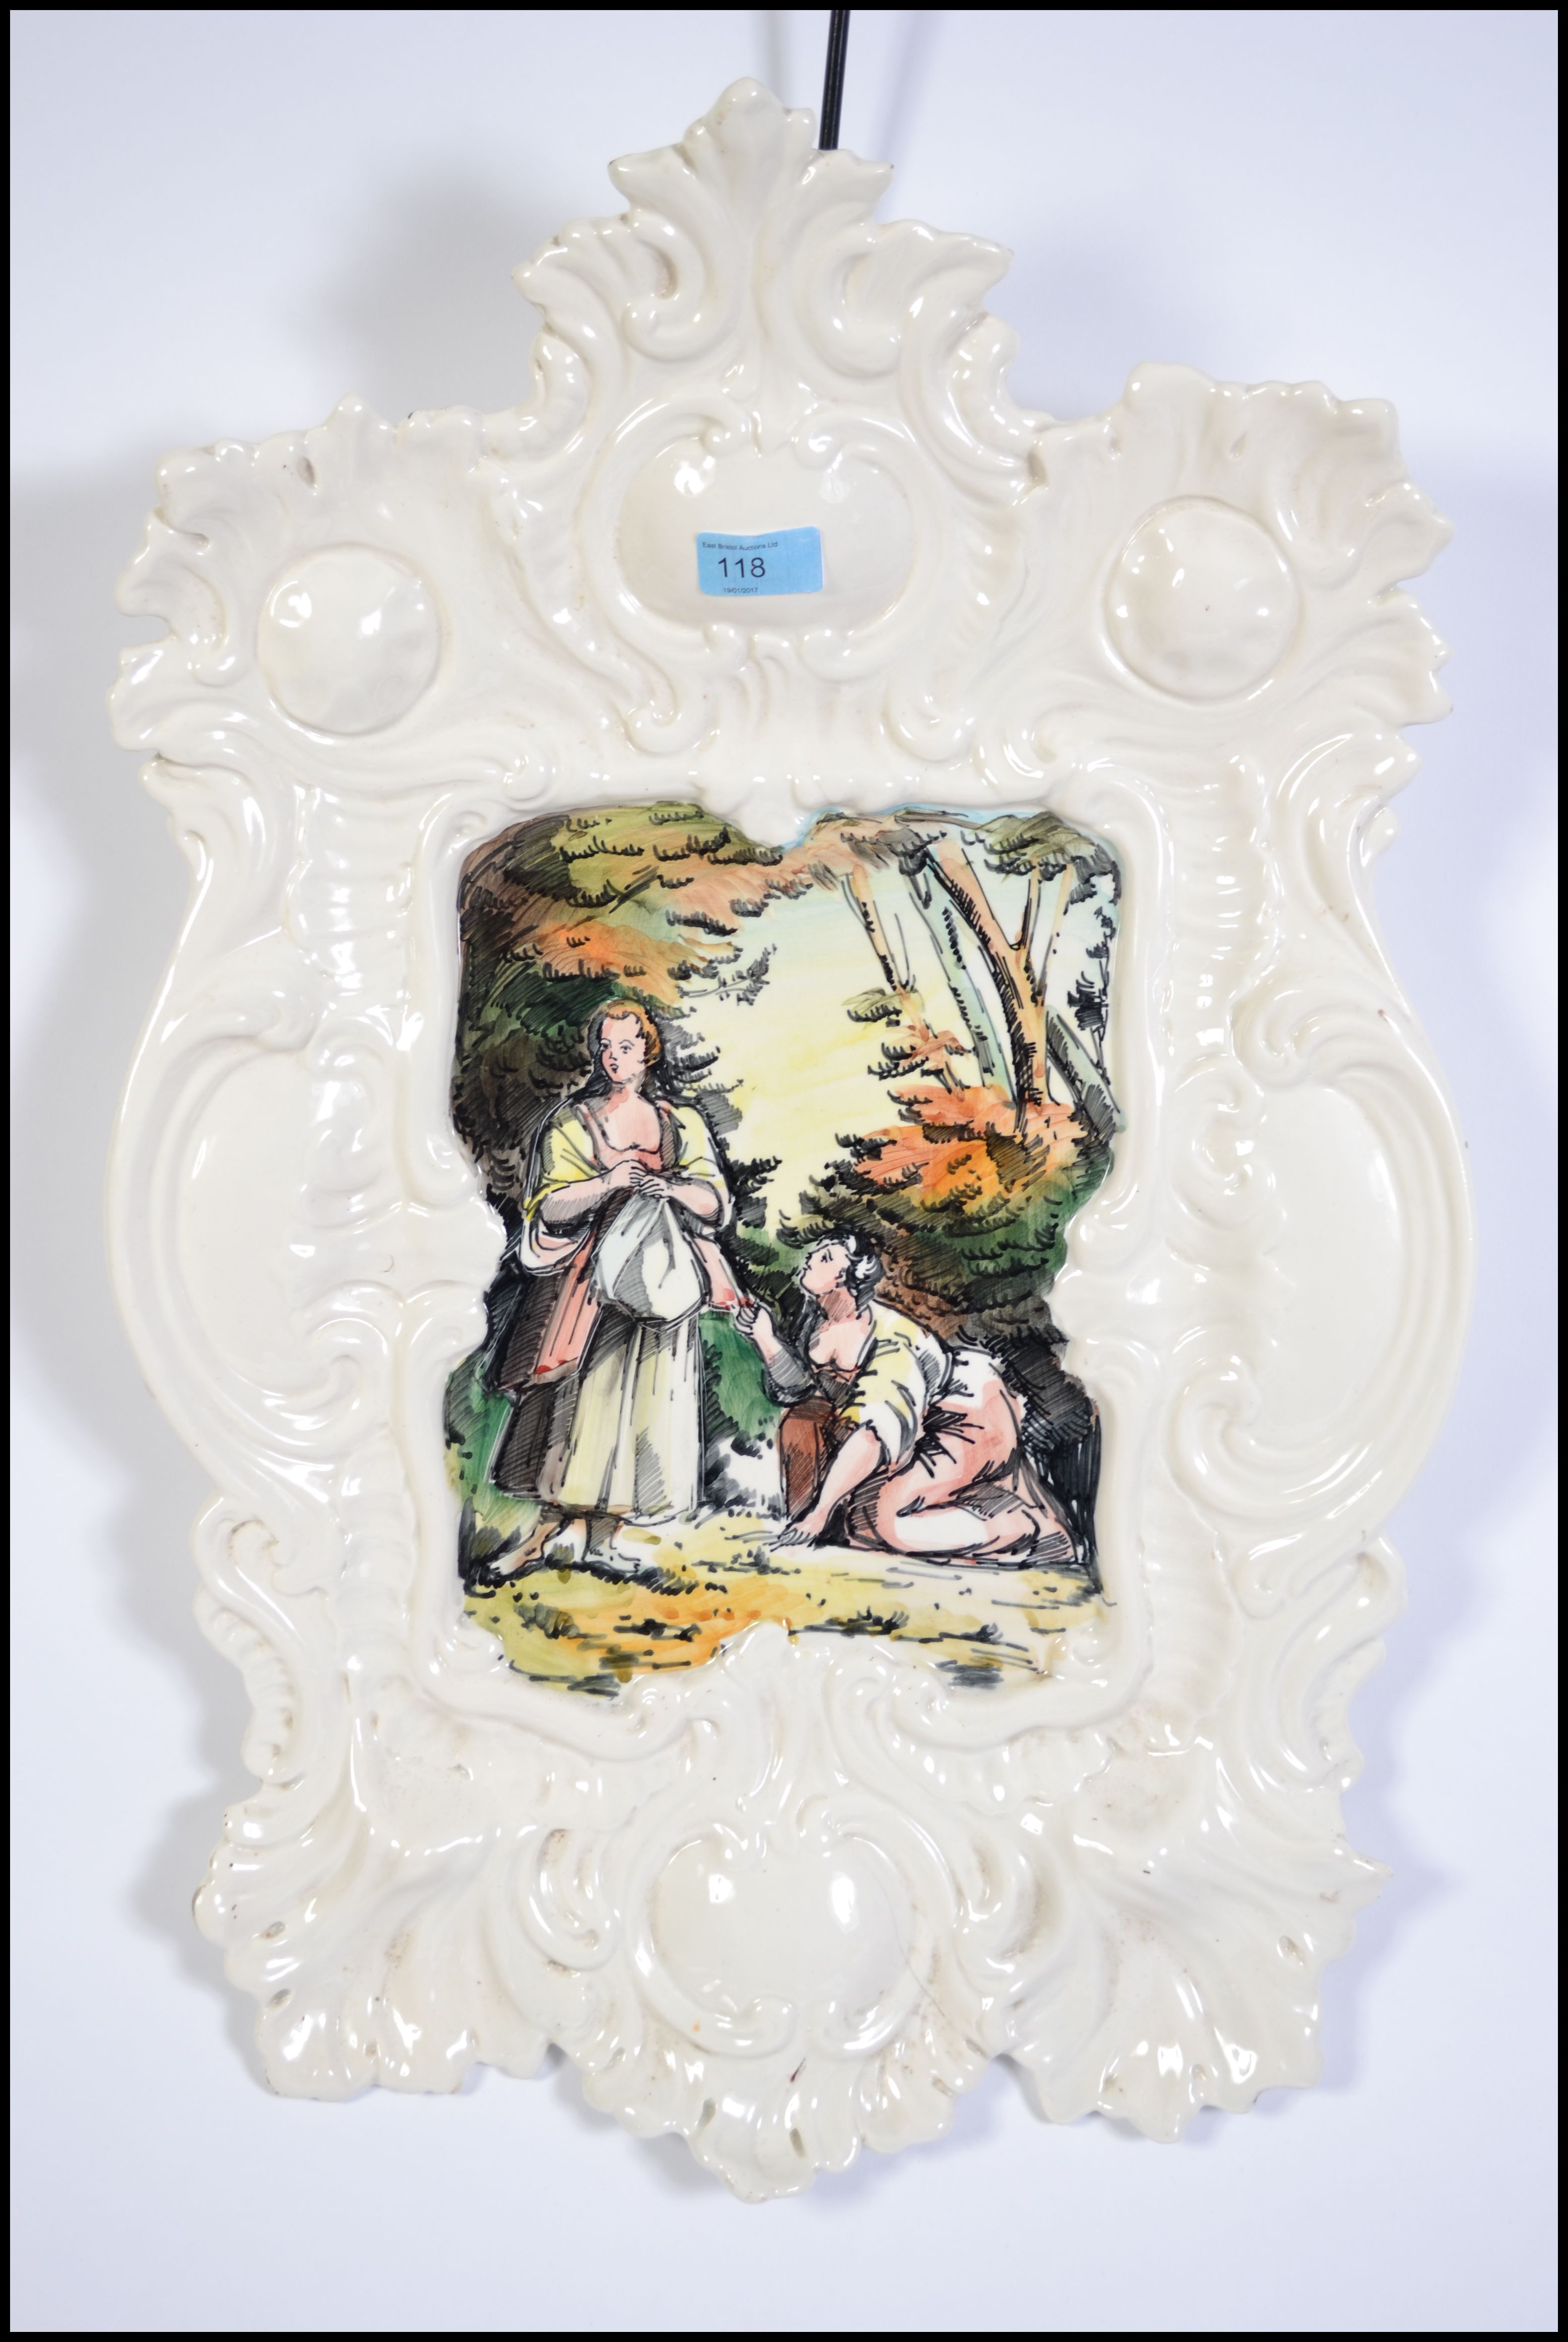 A large wall hanging ceramic wall charger. Italian in origin having a rococo stylized border with